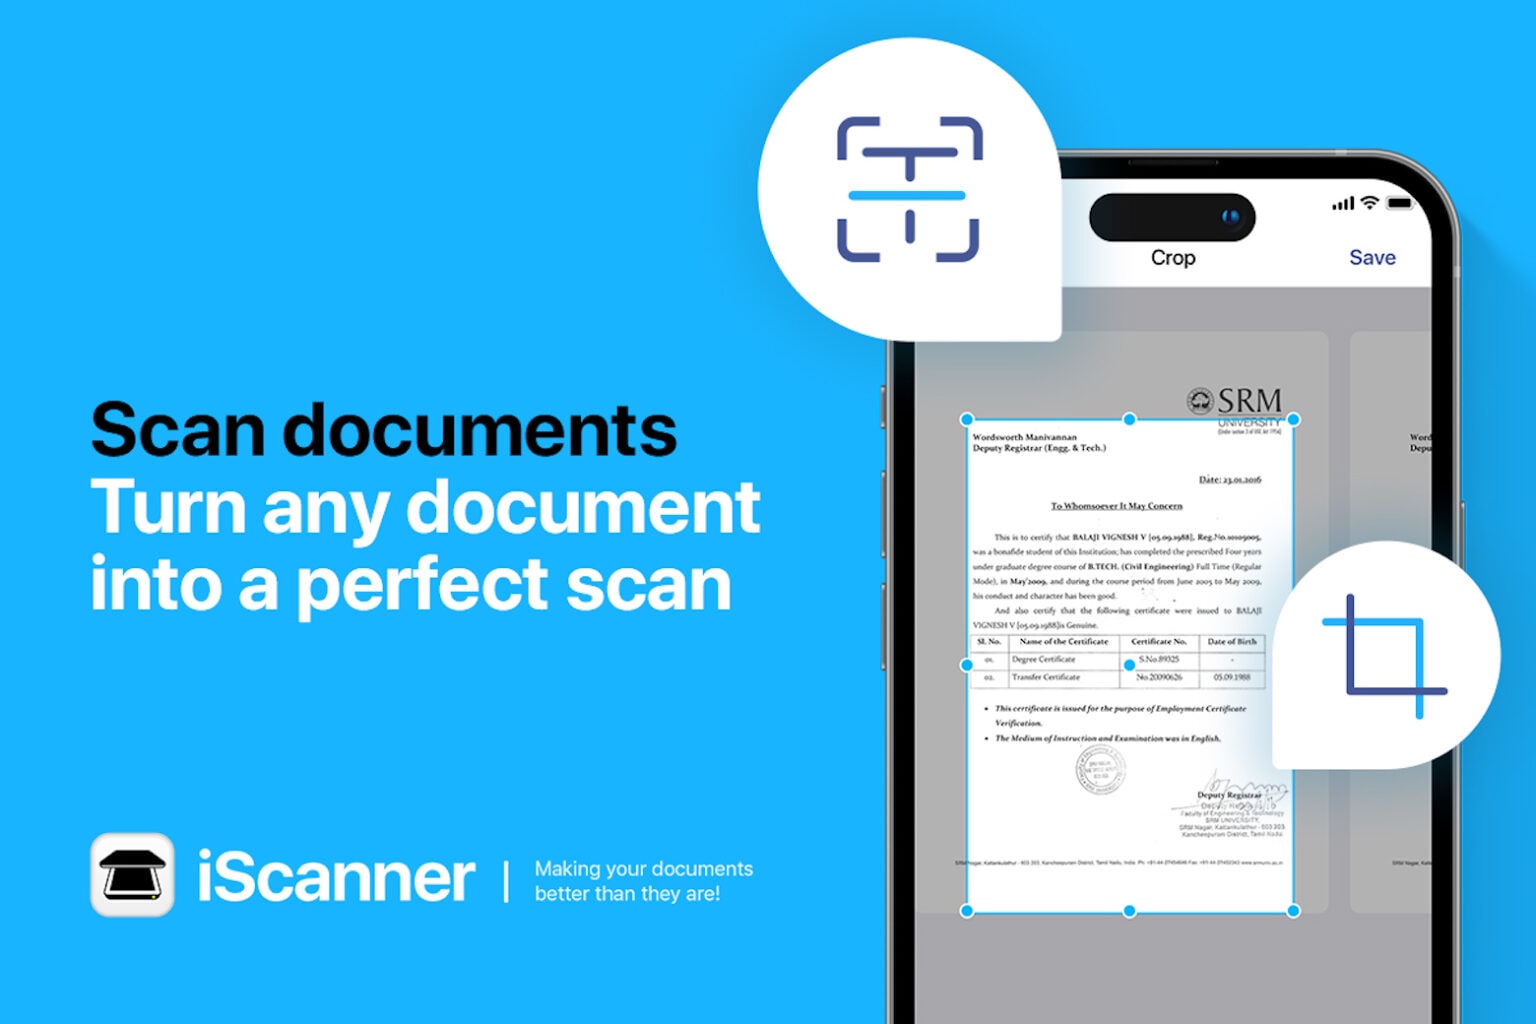 Get this iOS OCR scanner app while it's only $40 for lifetime access.